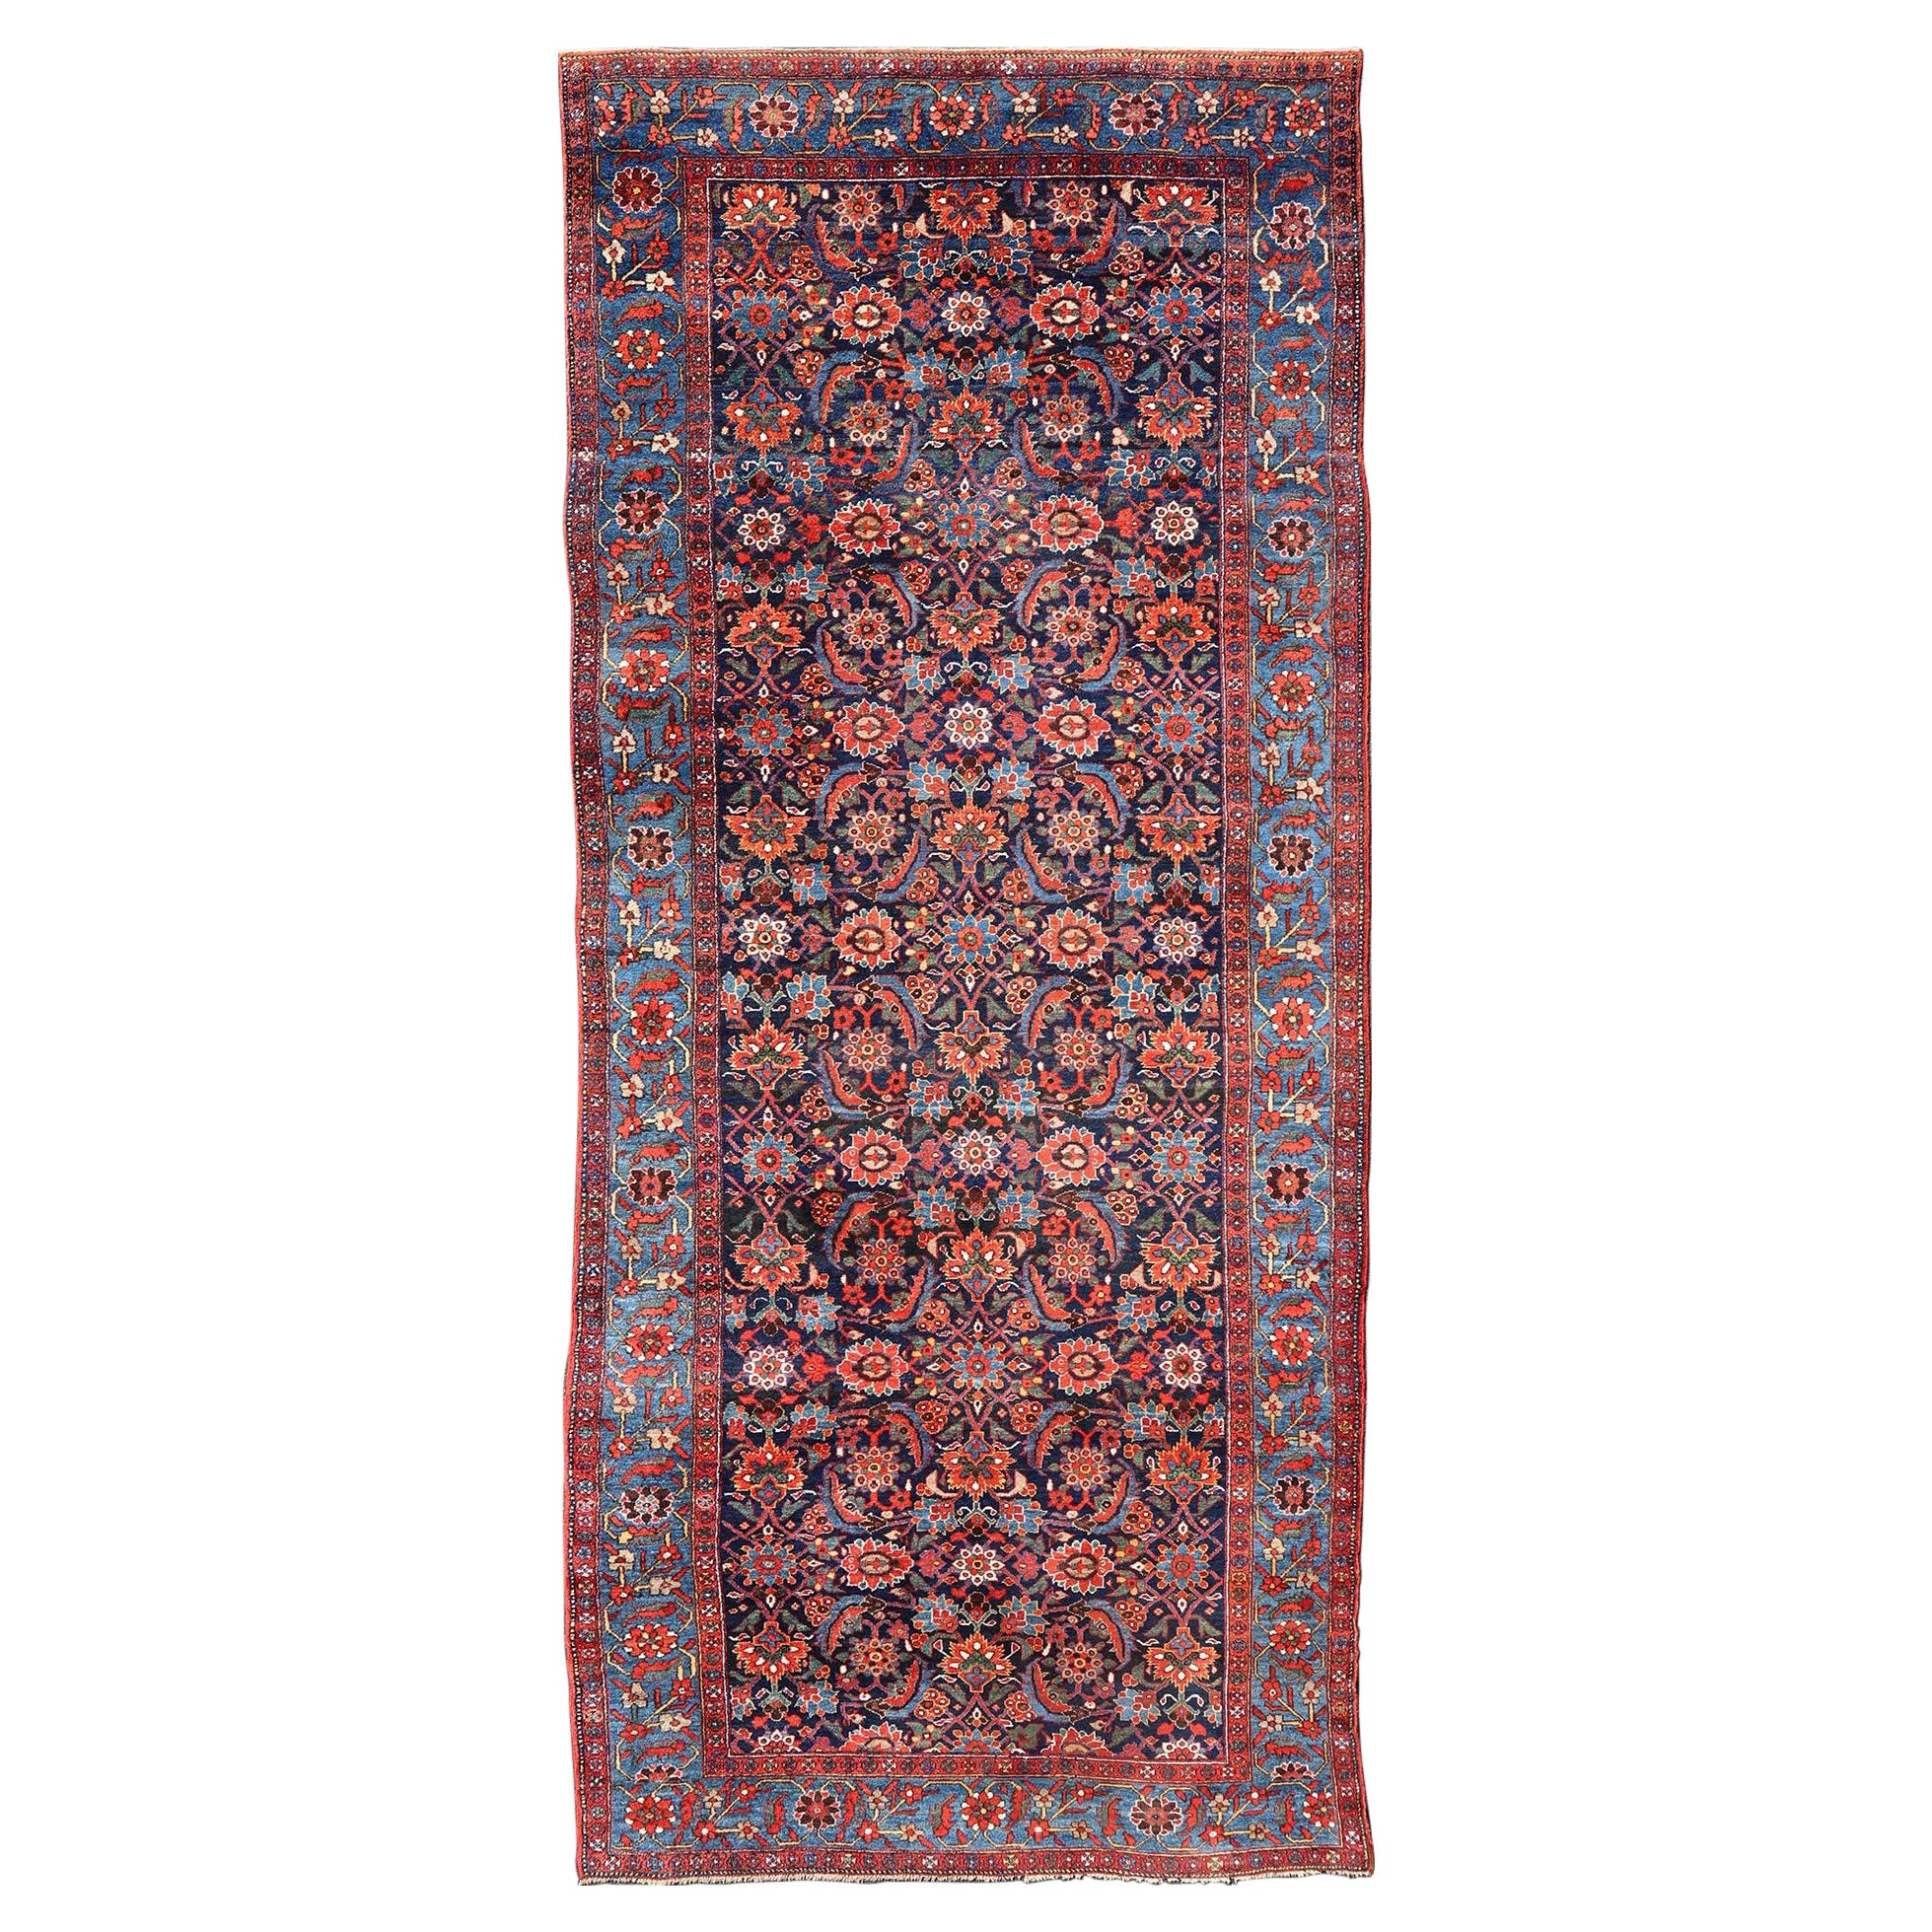 Antique Persian Fine Weave Hamadan Gallery Rug in Red, Blue, Green and Ivory